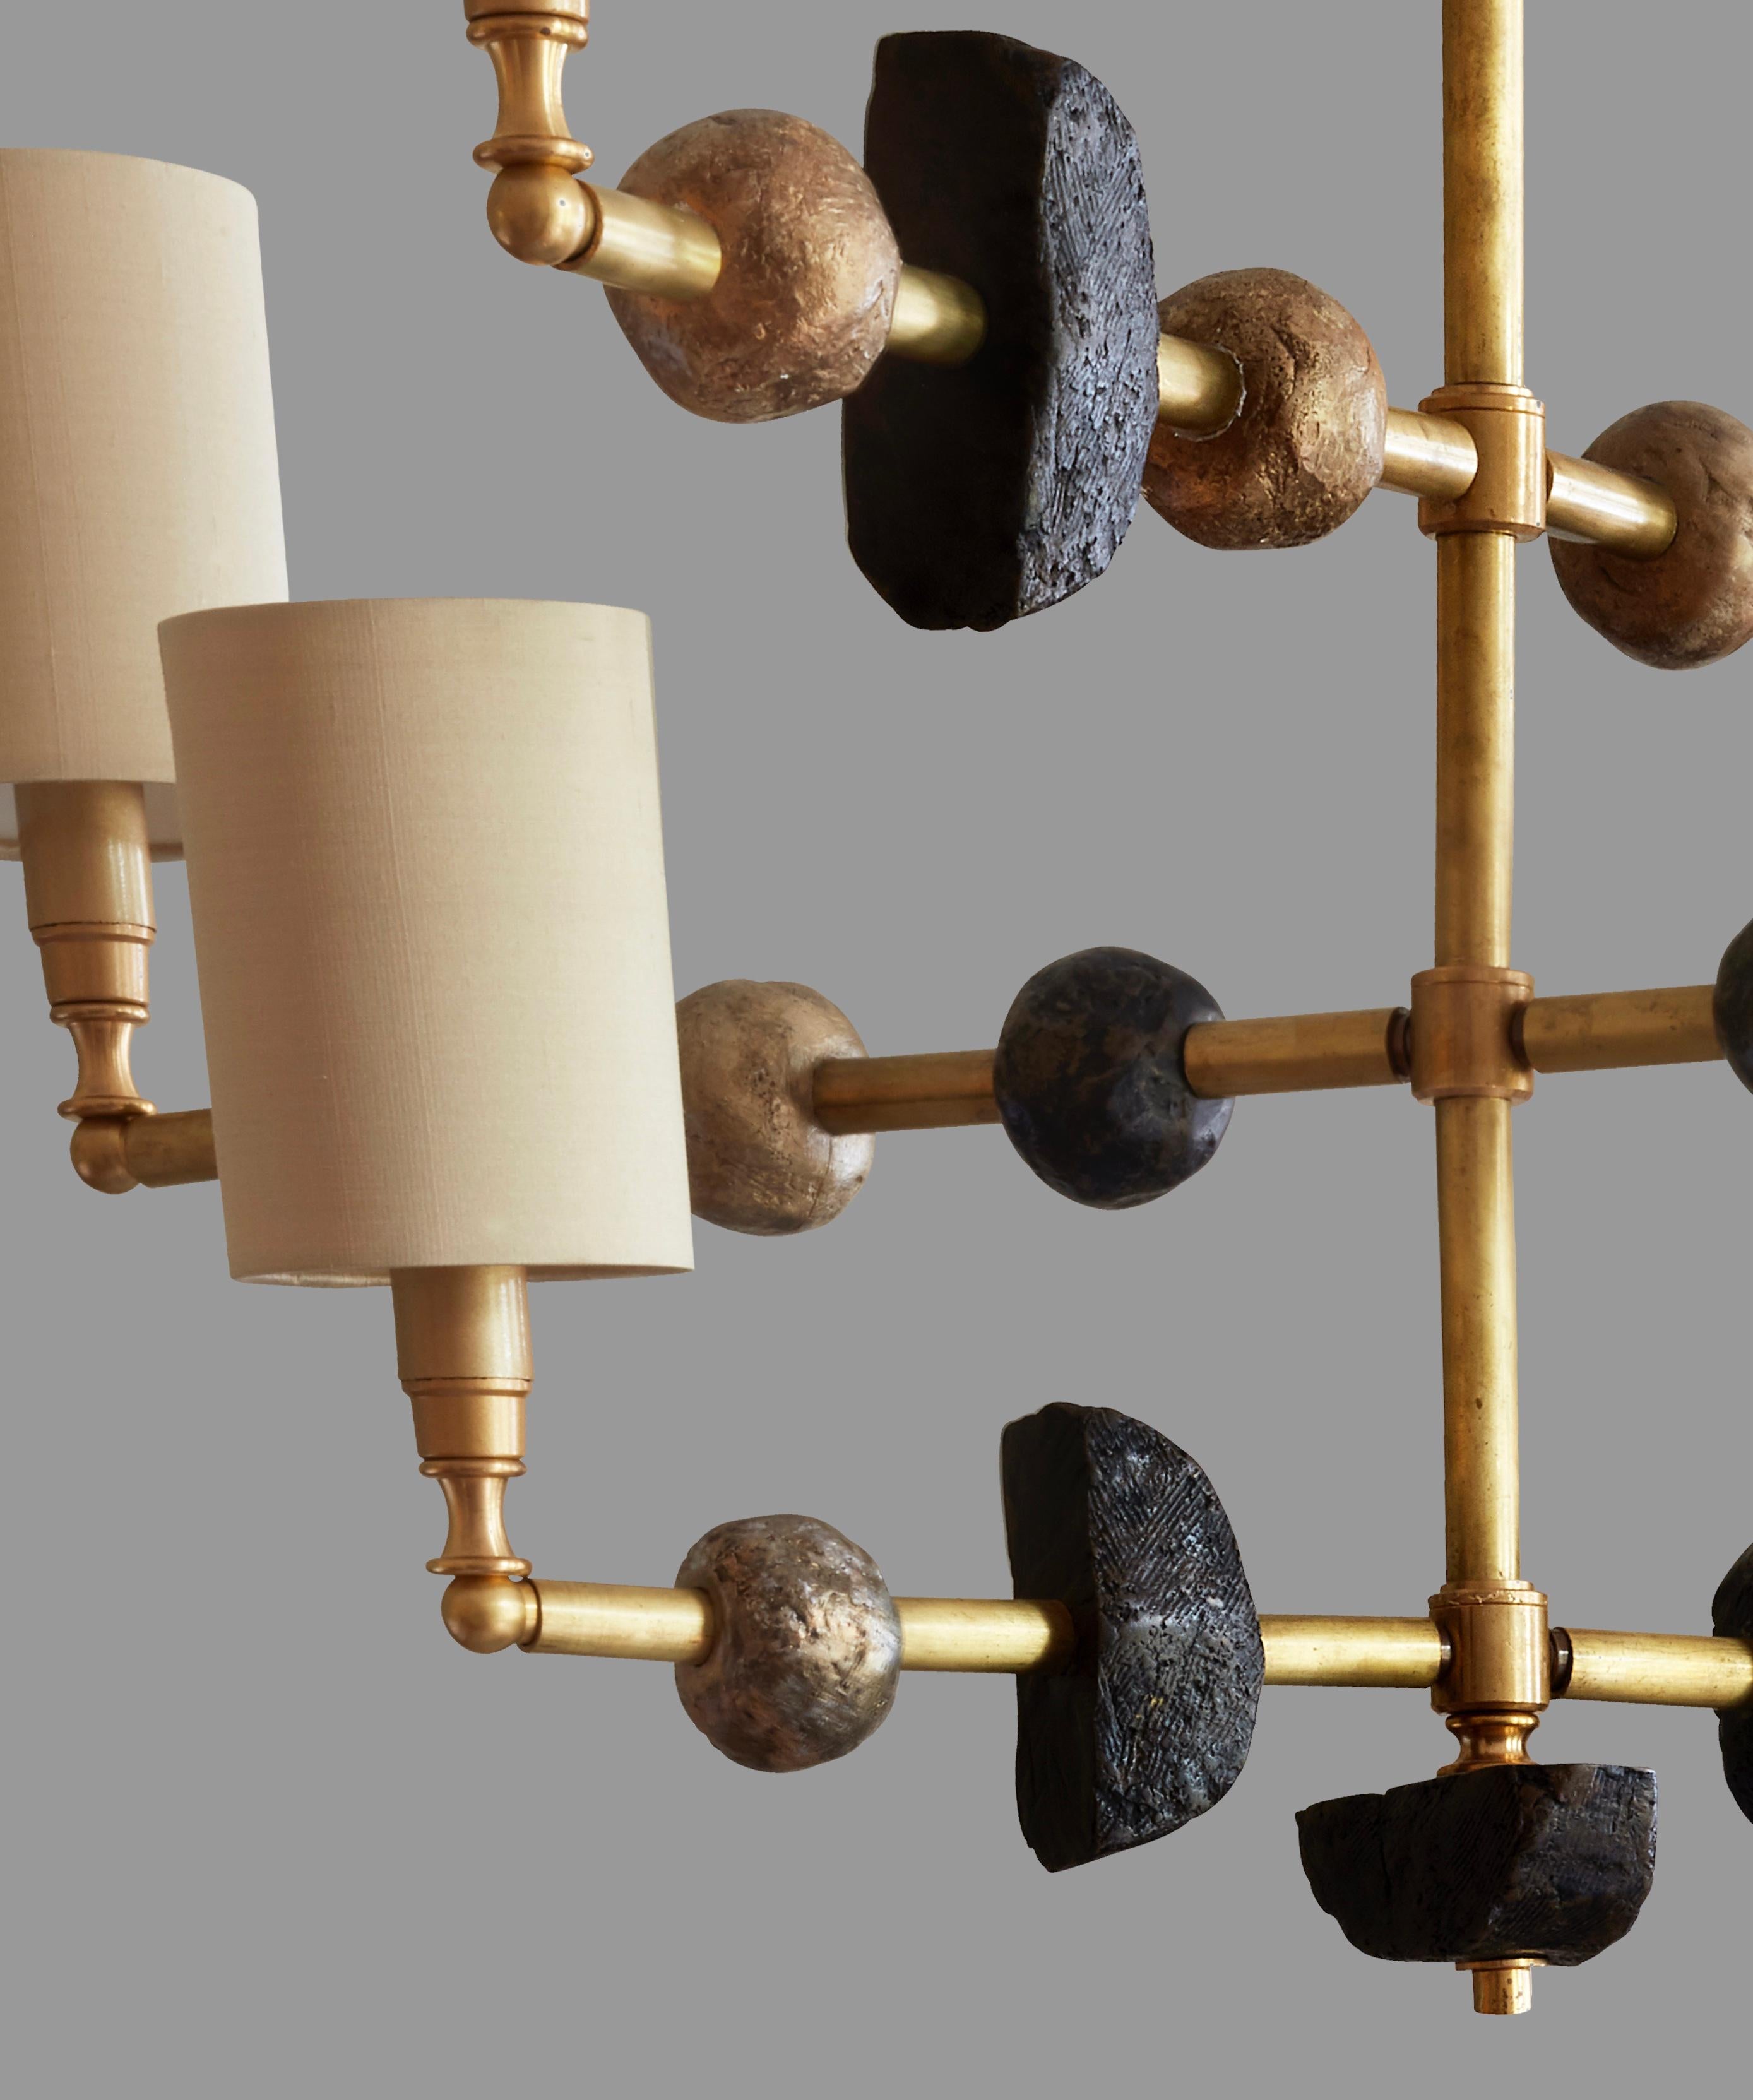 English 'Mayfair' Contemporary Chandelier, Brass with Sculpted Spheres by Margit Wittig